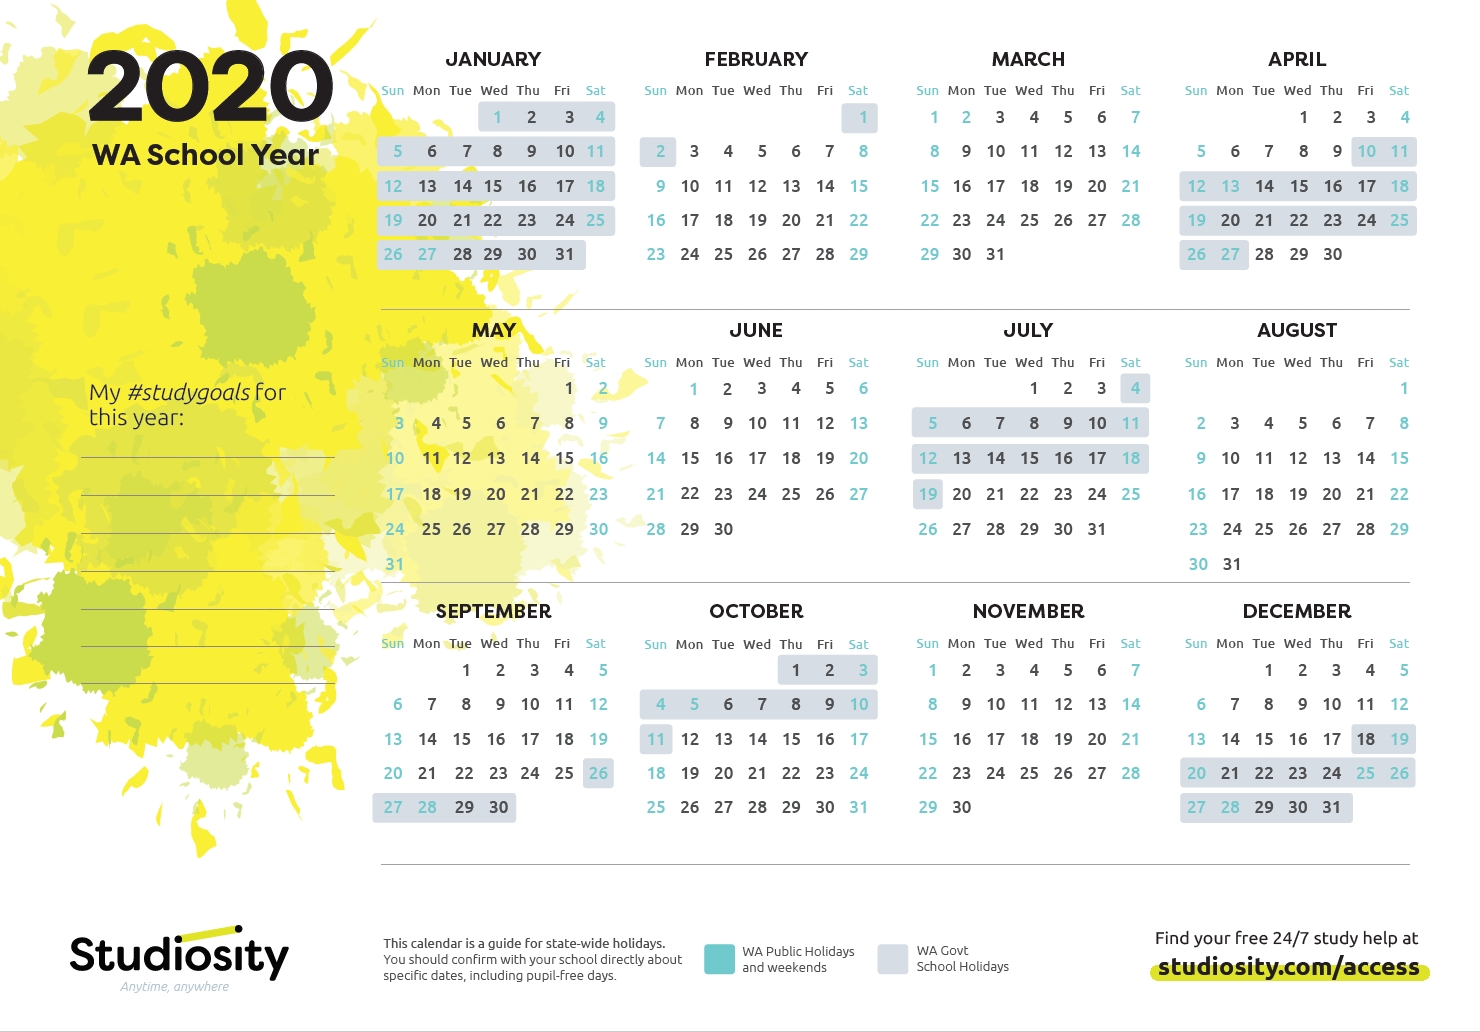 School Terms And Public Holiday Dates For Wa In 2020 Perky Printable 2020 Calendar With School Terms And Public Holidays